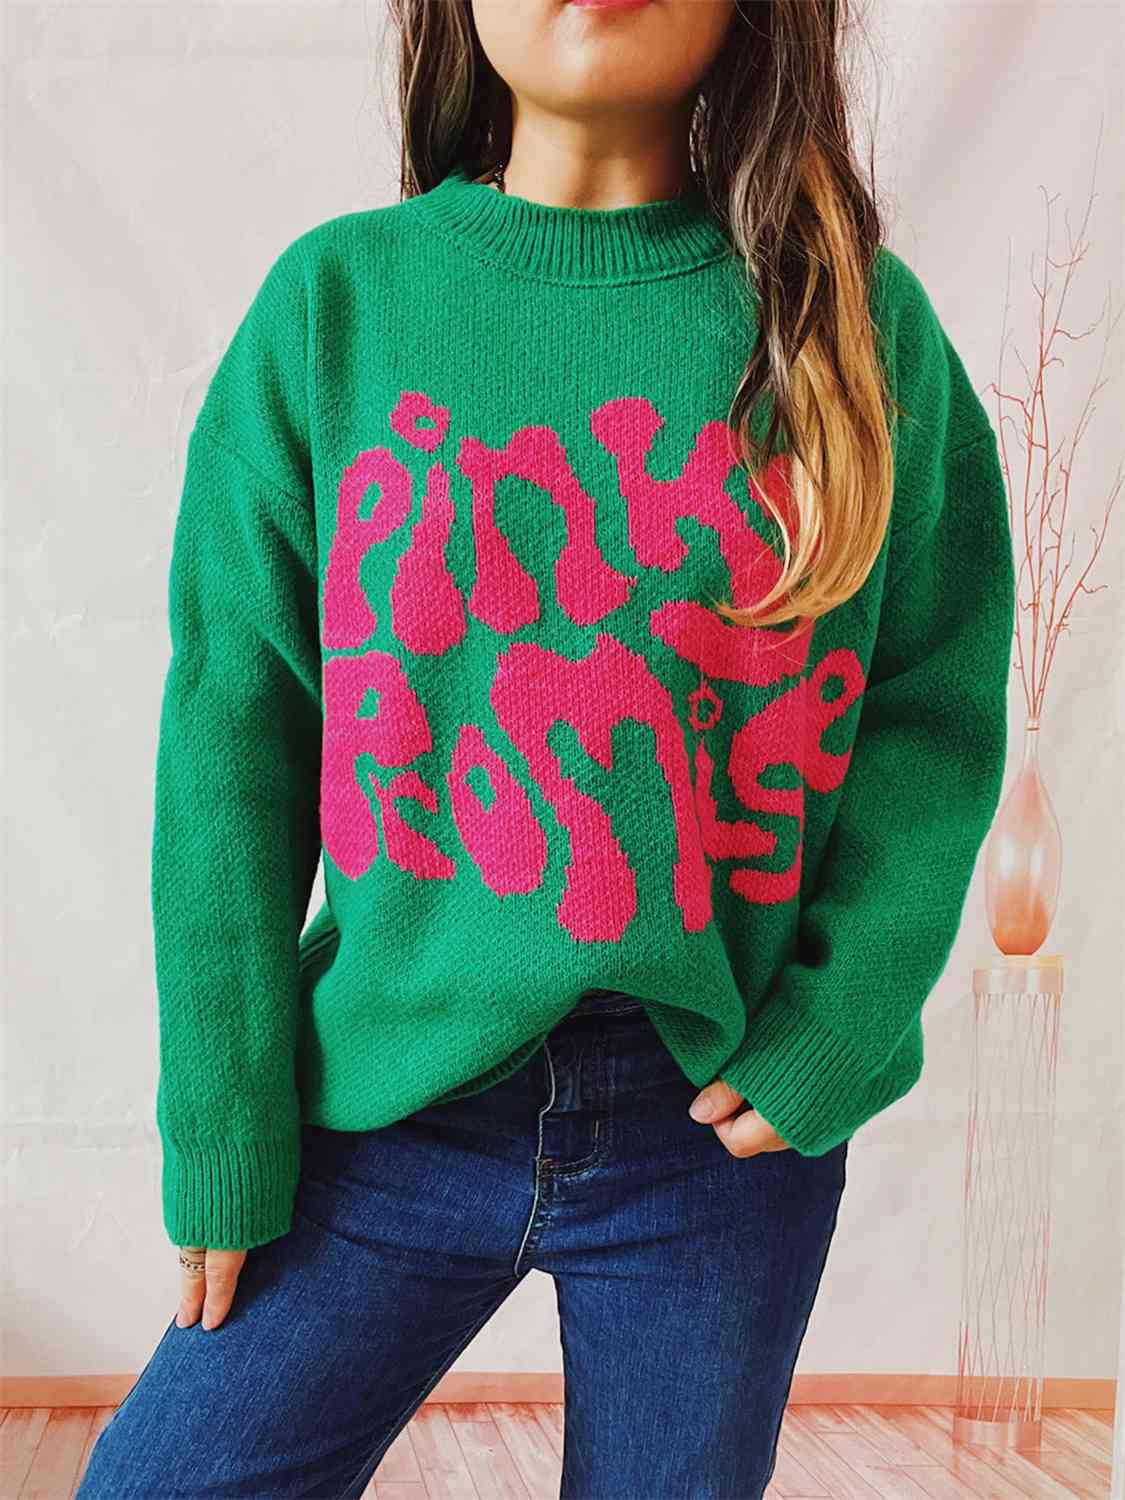 PINKY PROMISE Graphic Sweater